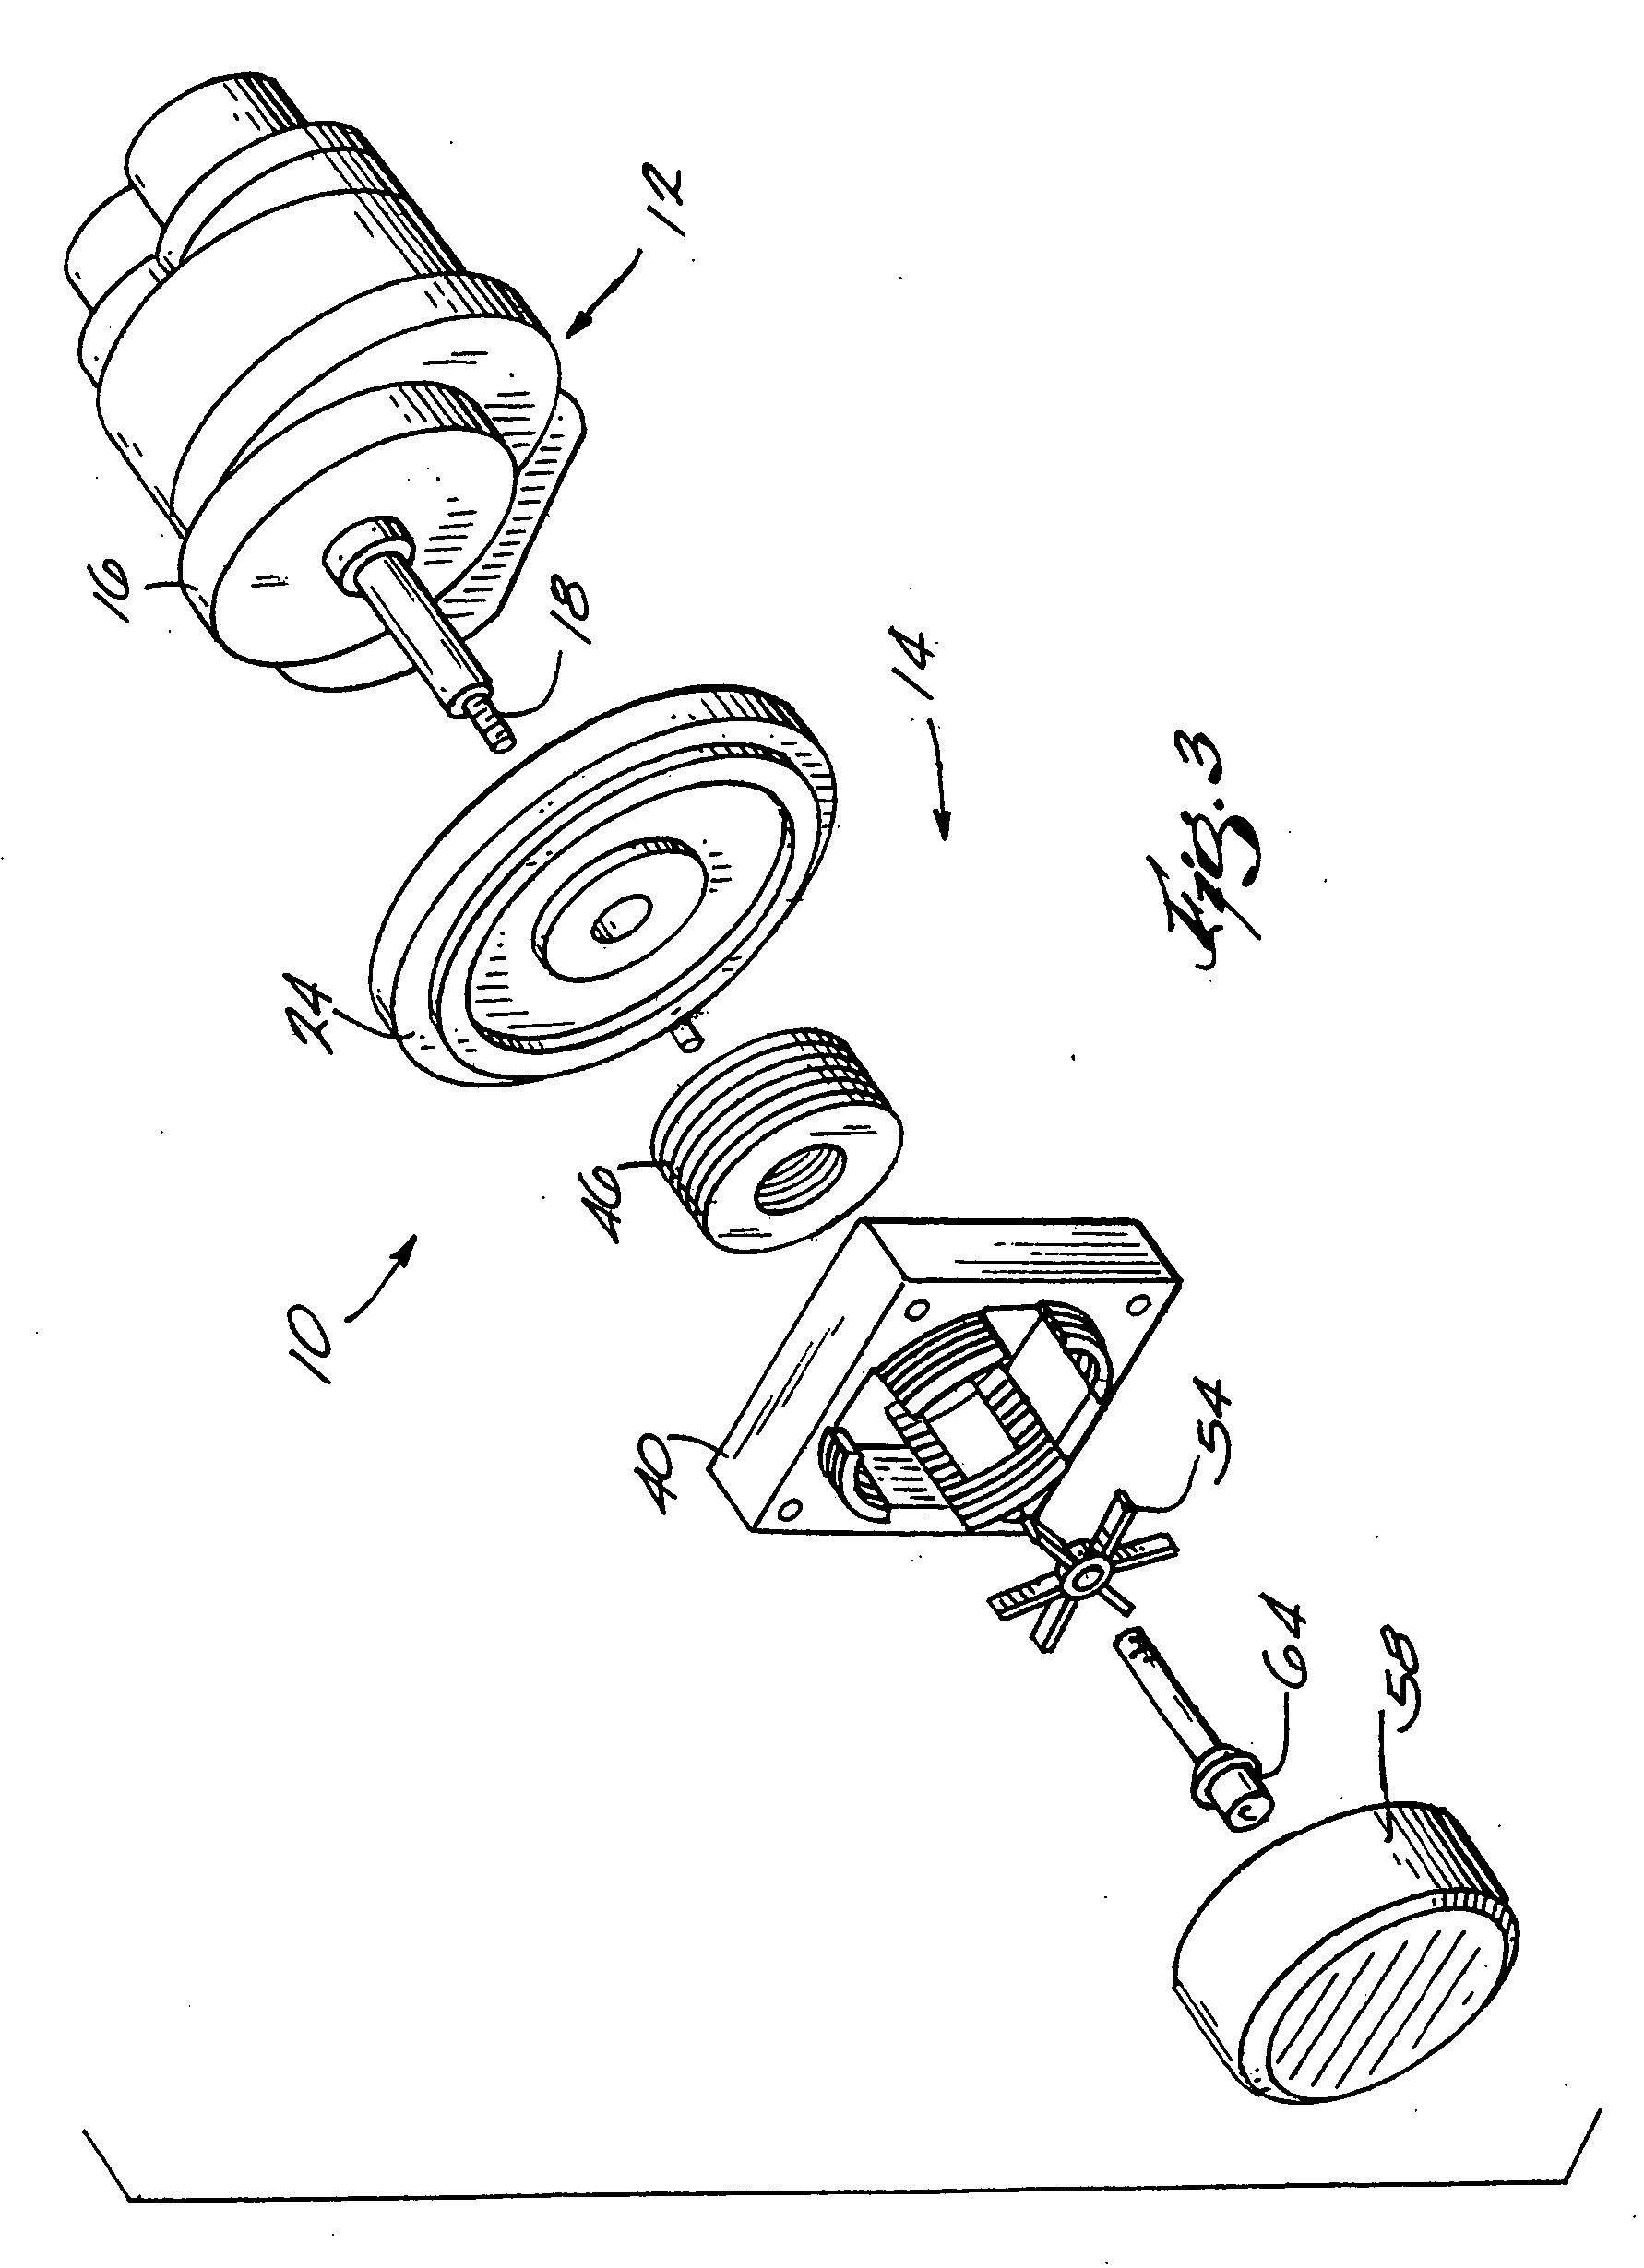 Compressor and driving motor assembly